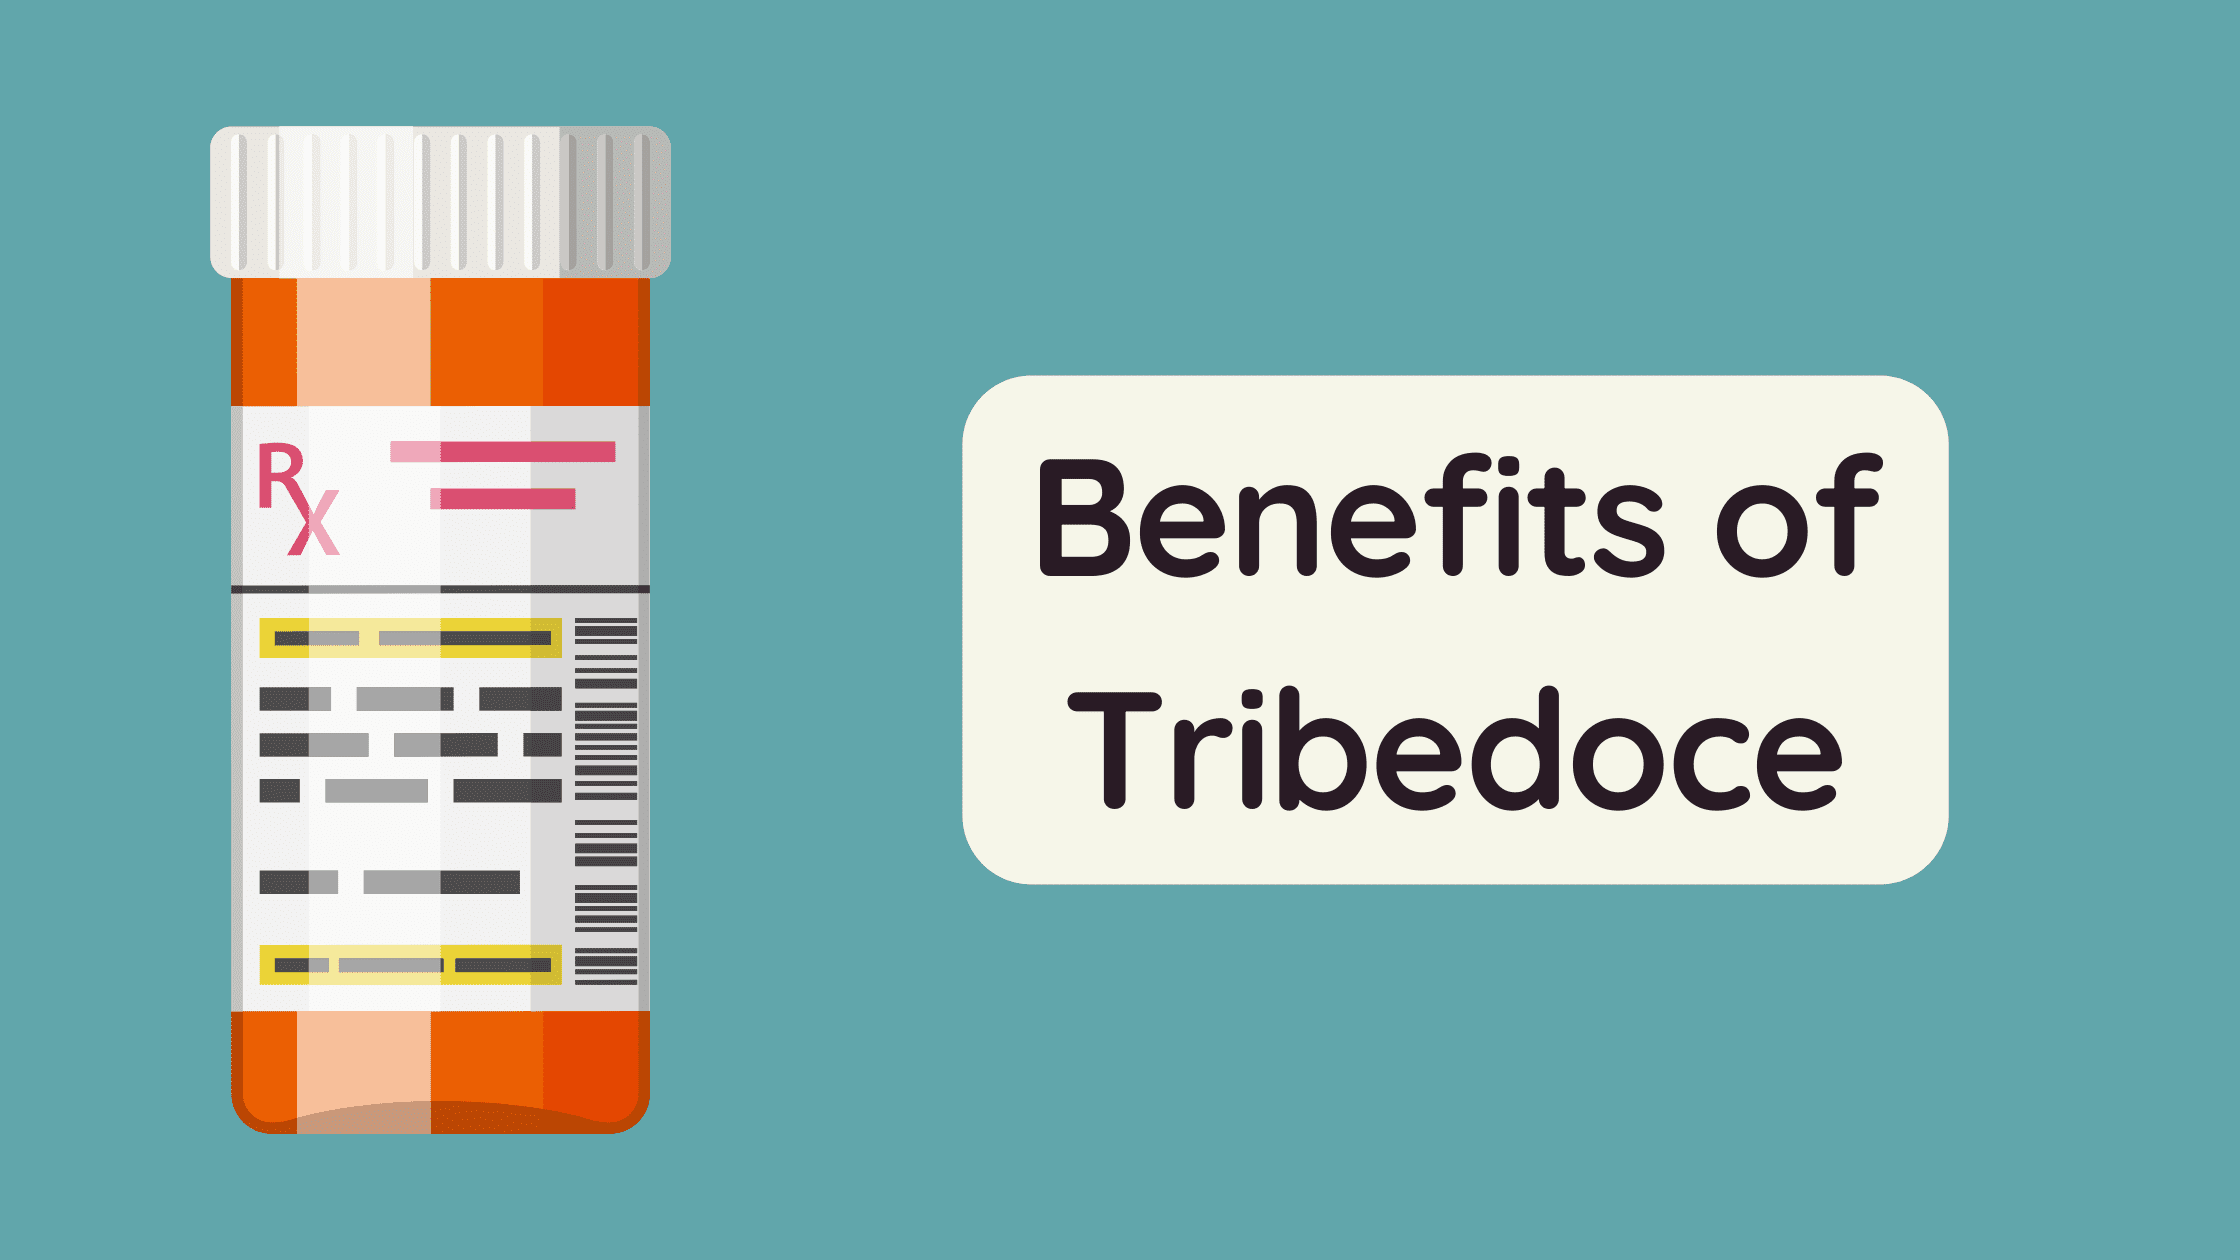 Benefits of Tribedoce